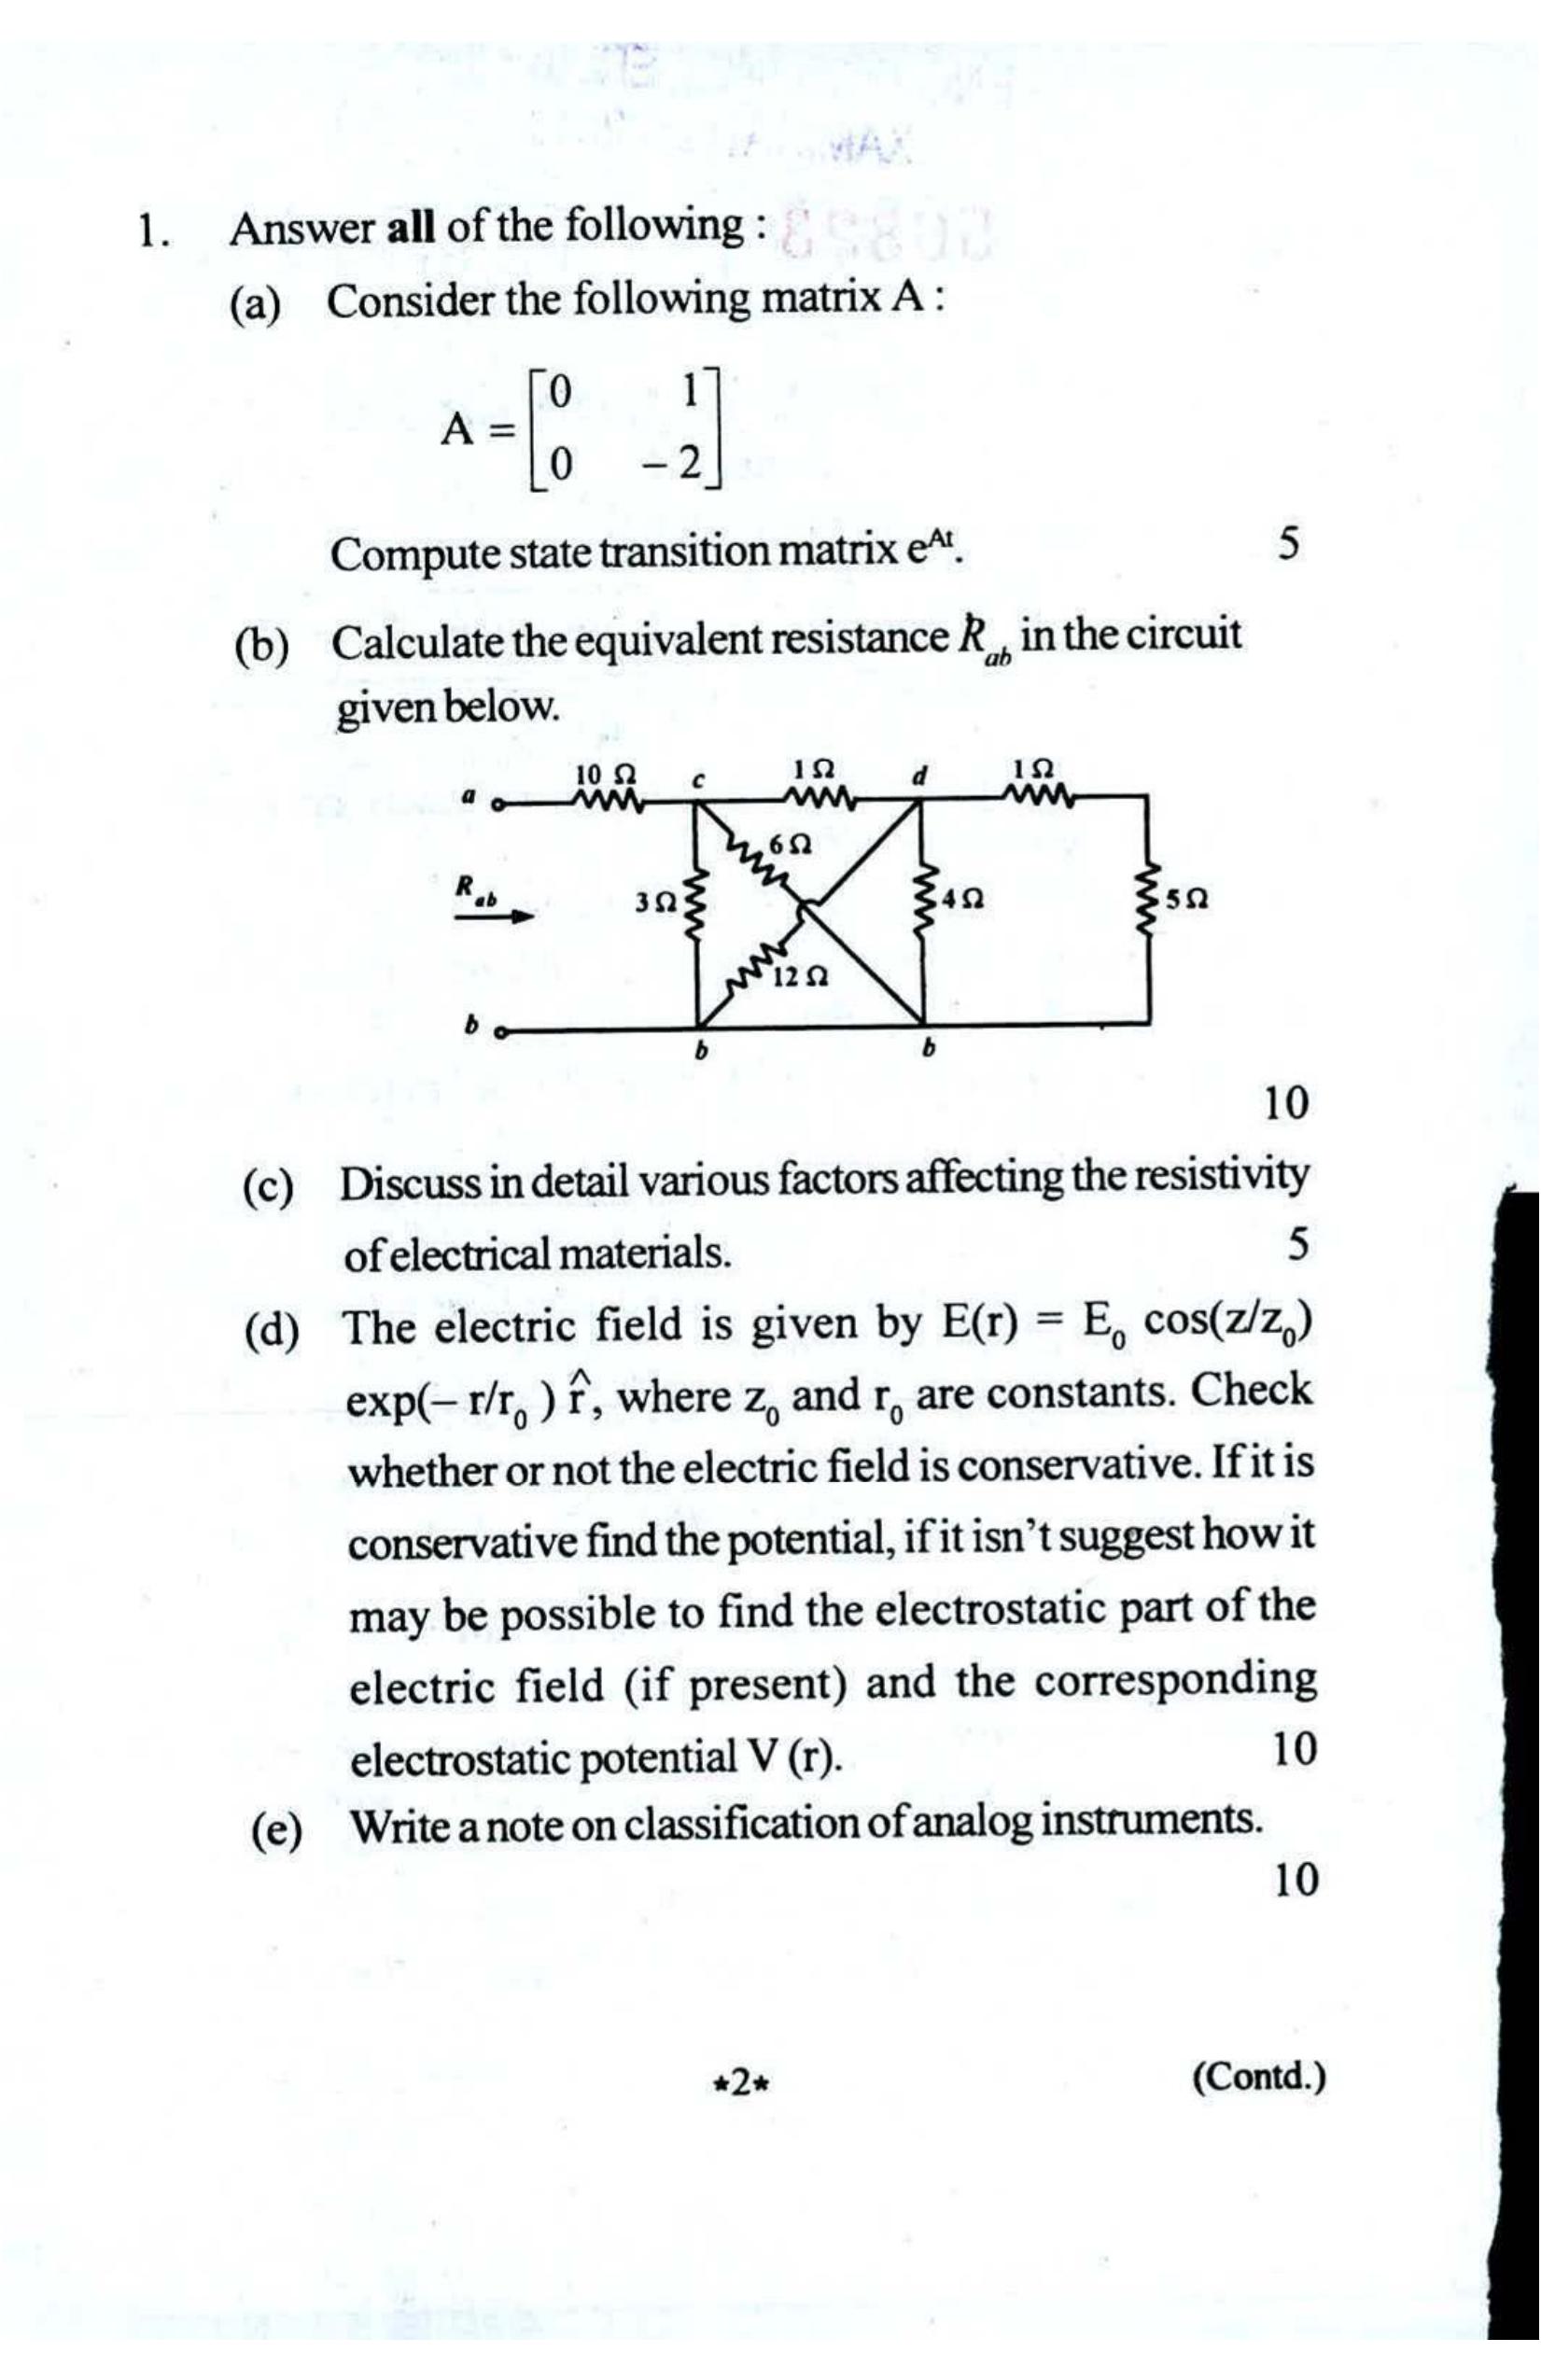 VCRC Technical Assistant Previous Papers Electrical Engineering - Page 2